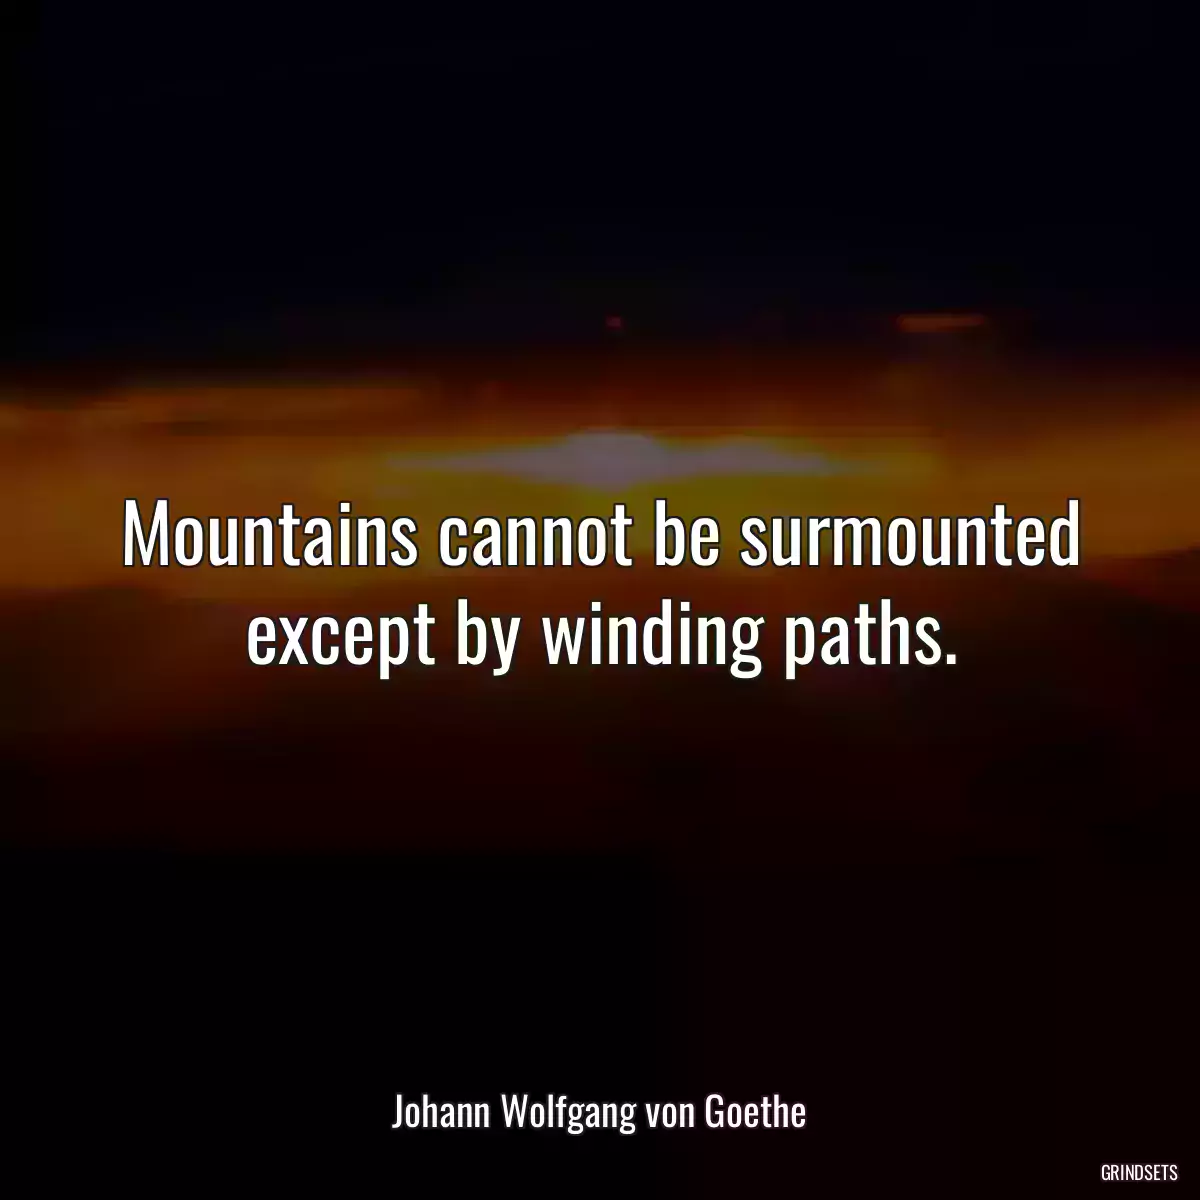 Mountains cannot be surmounted except by winding paths.